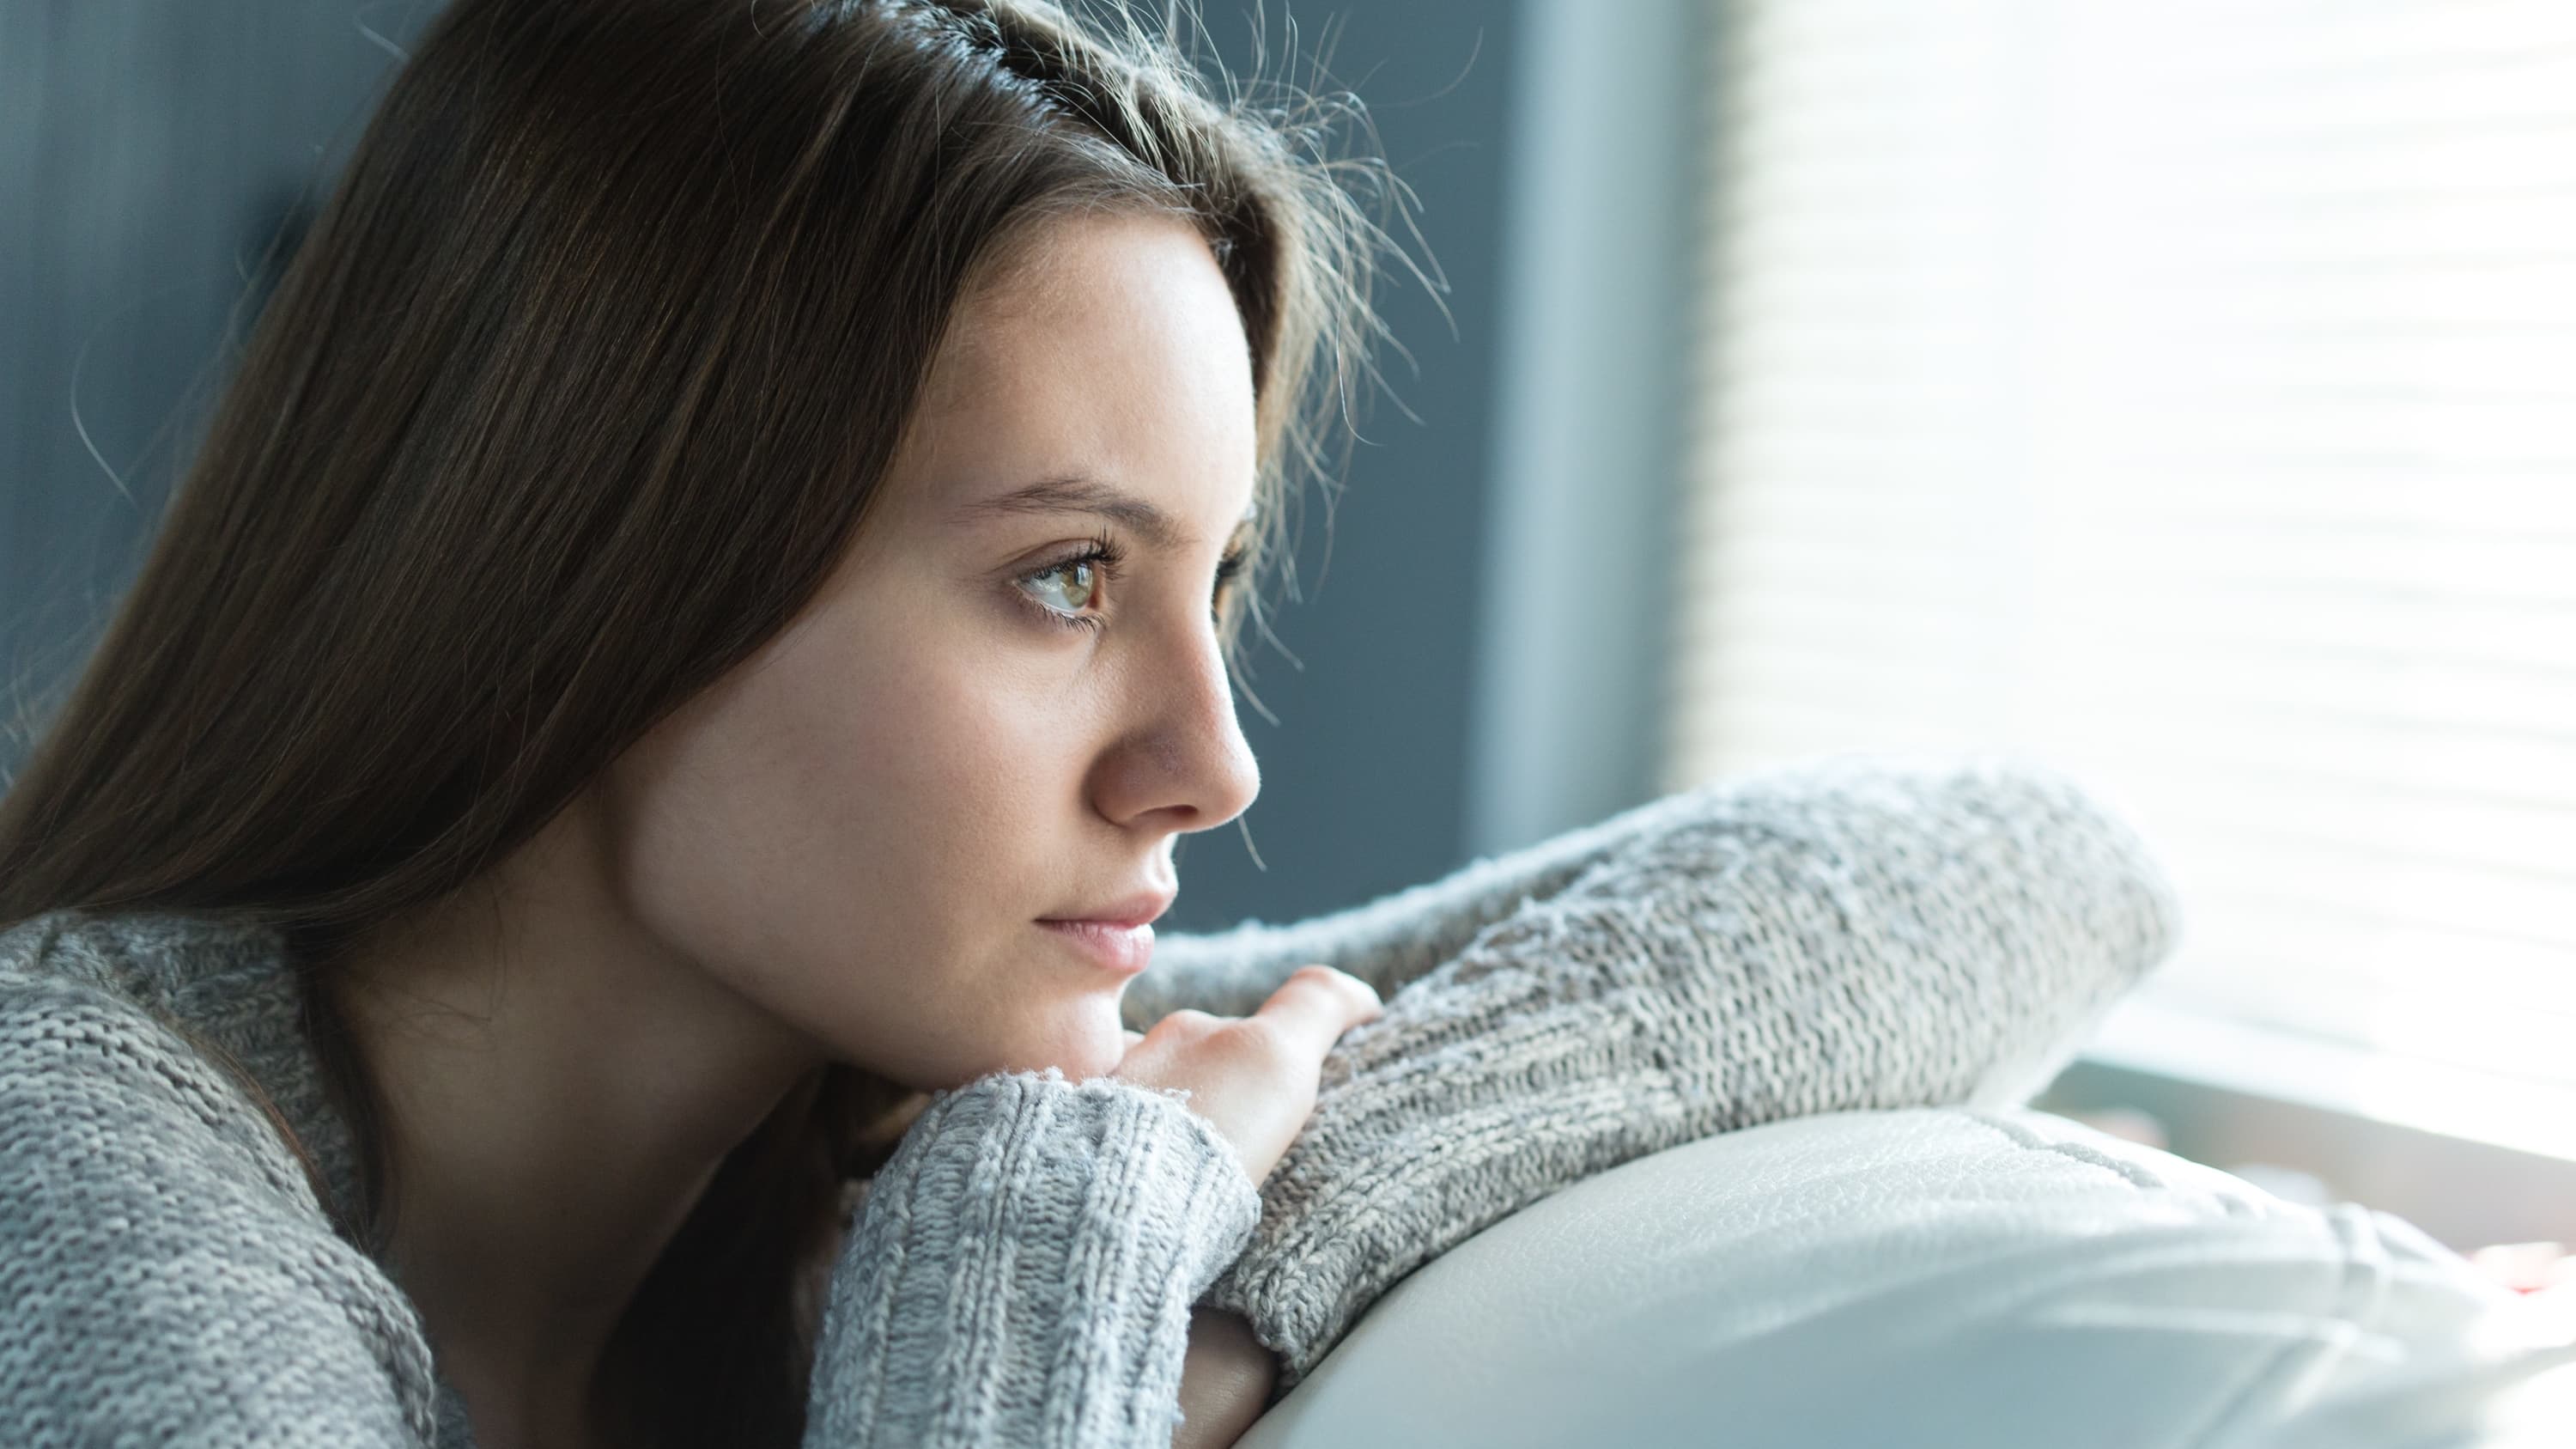 woman looking out window, possibly worried about vaginitis